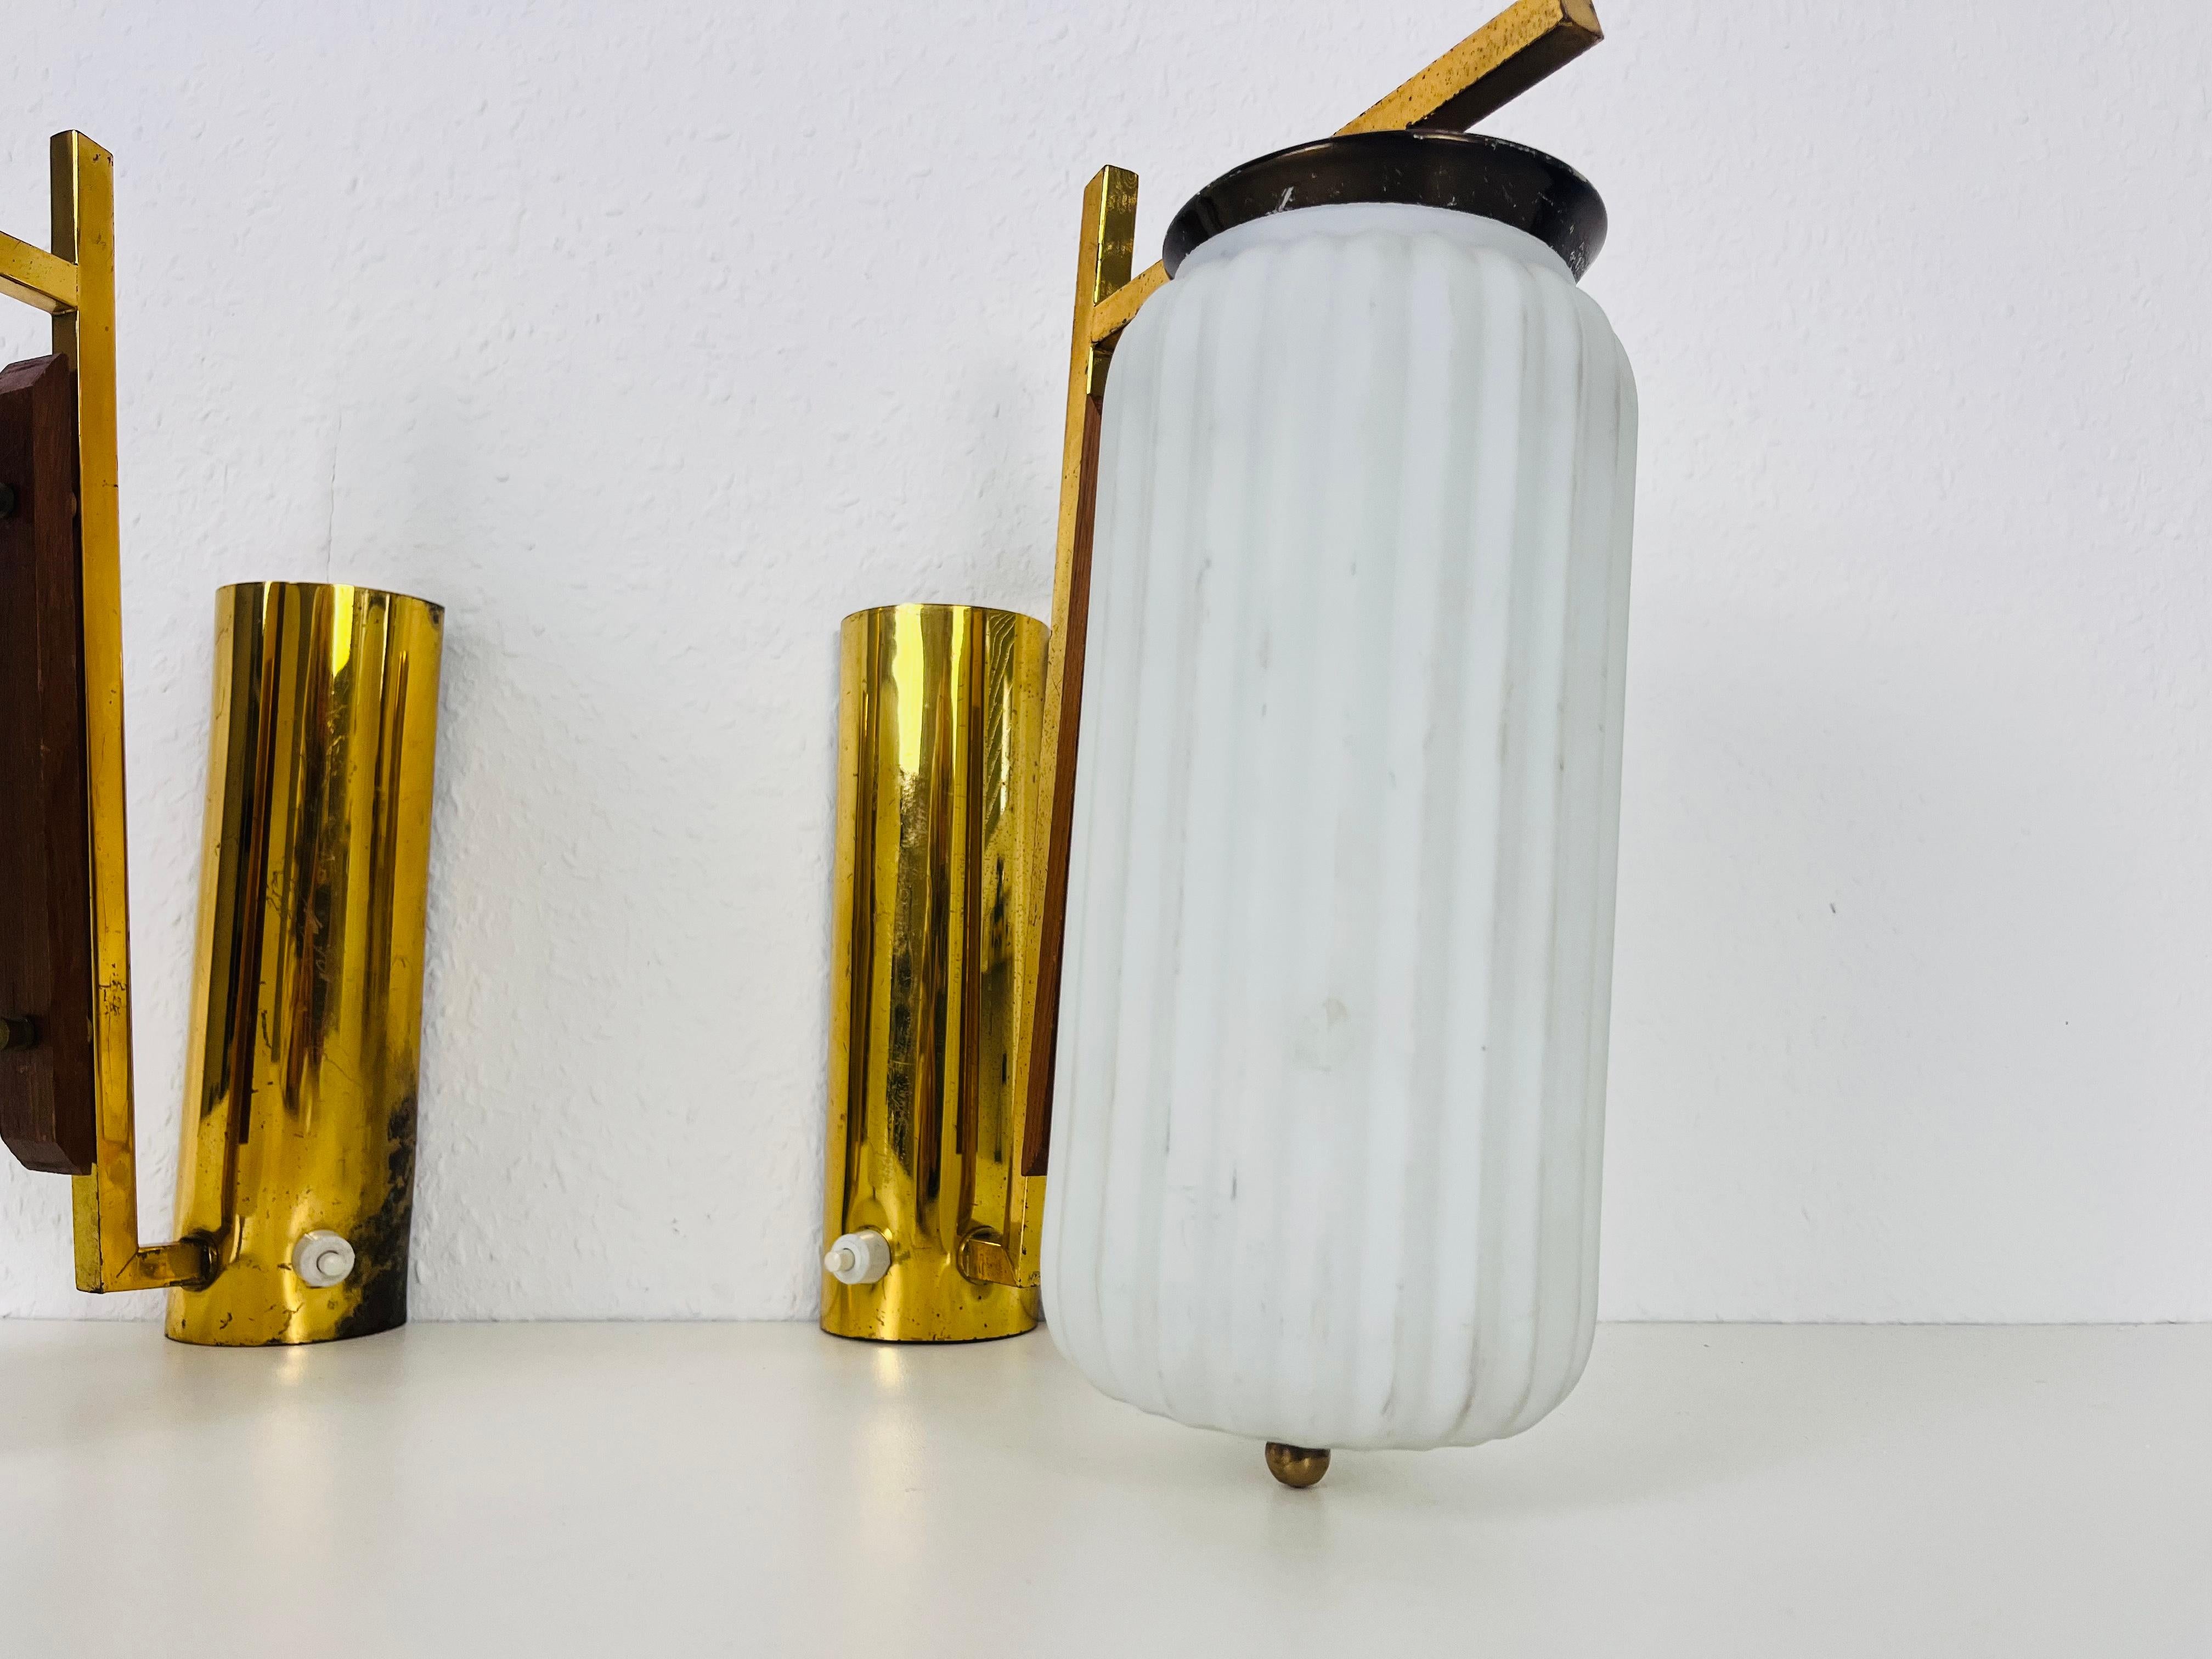 Pair of Stilnovo Brass and Opaline Glass Wall Lamps, Italy, 1960s For Sale 1